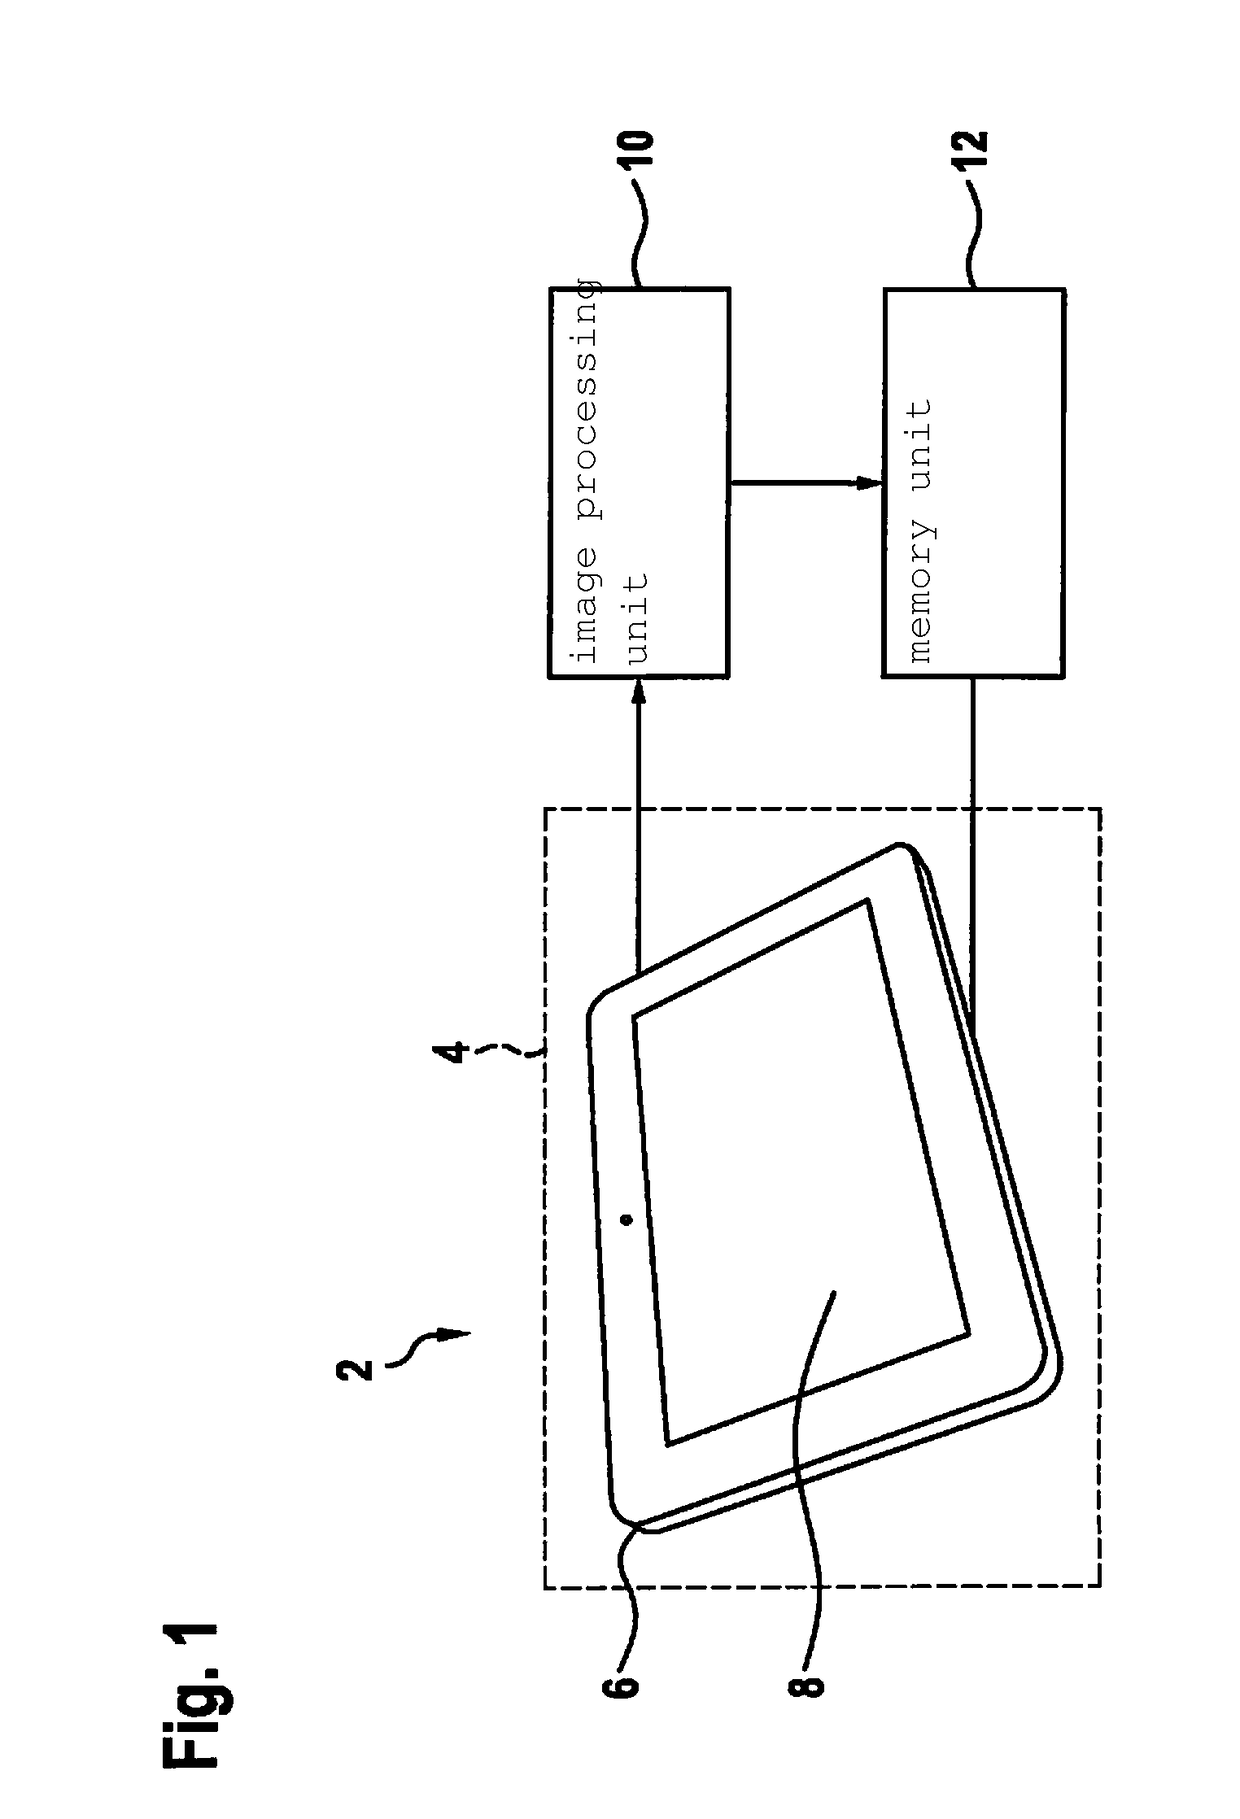 Identification and repair support device and method